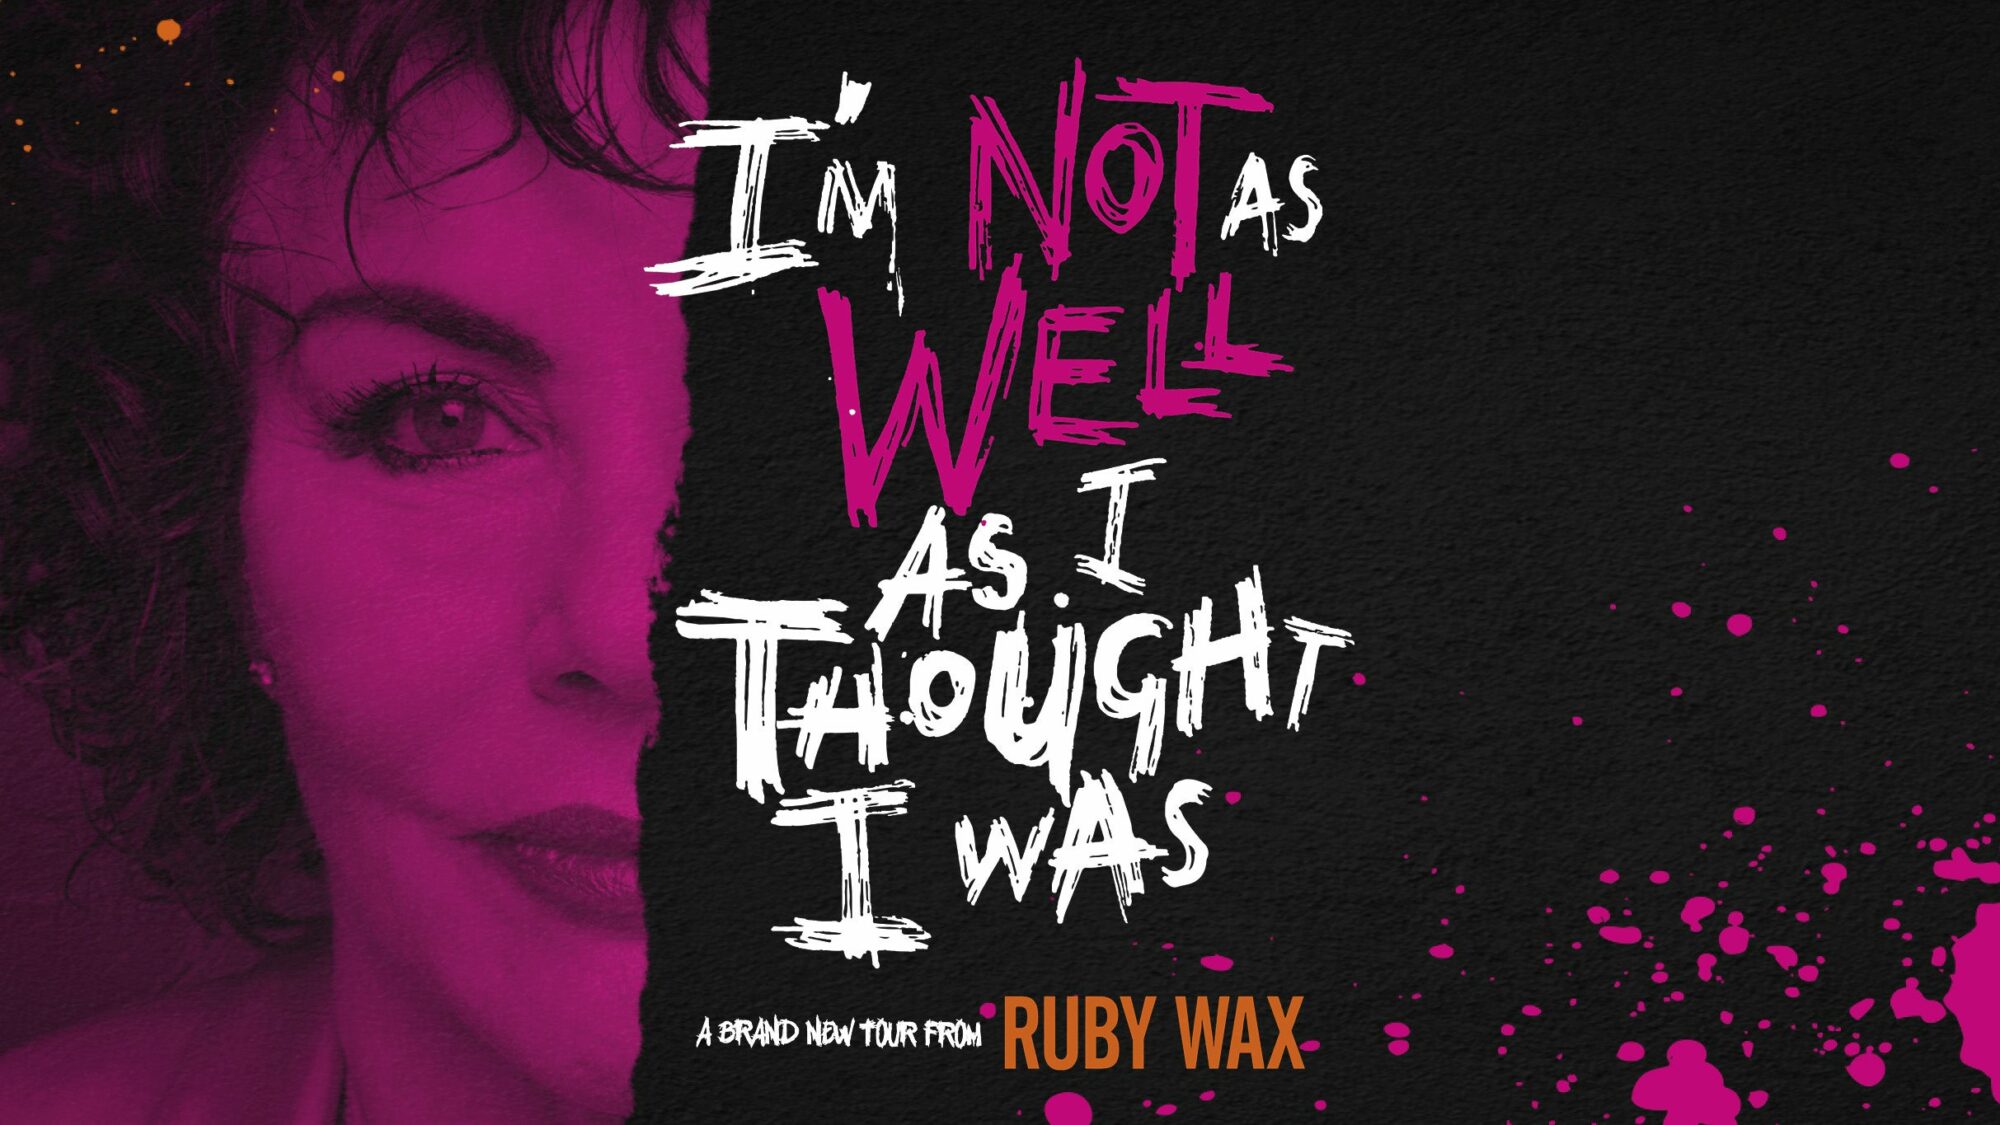 Image name Ruby Wax Im Not As Well As I Thought I Was at Grand Opera House York York the 1 image from the post Ruby Wax: I'm Not As Well As I Thought I Was at Grand Opera House, York in Yorkshire.com.